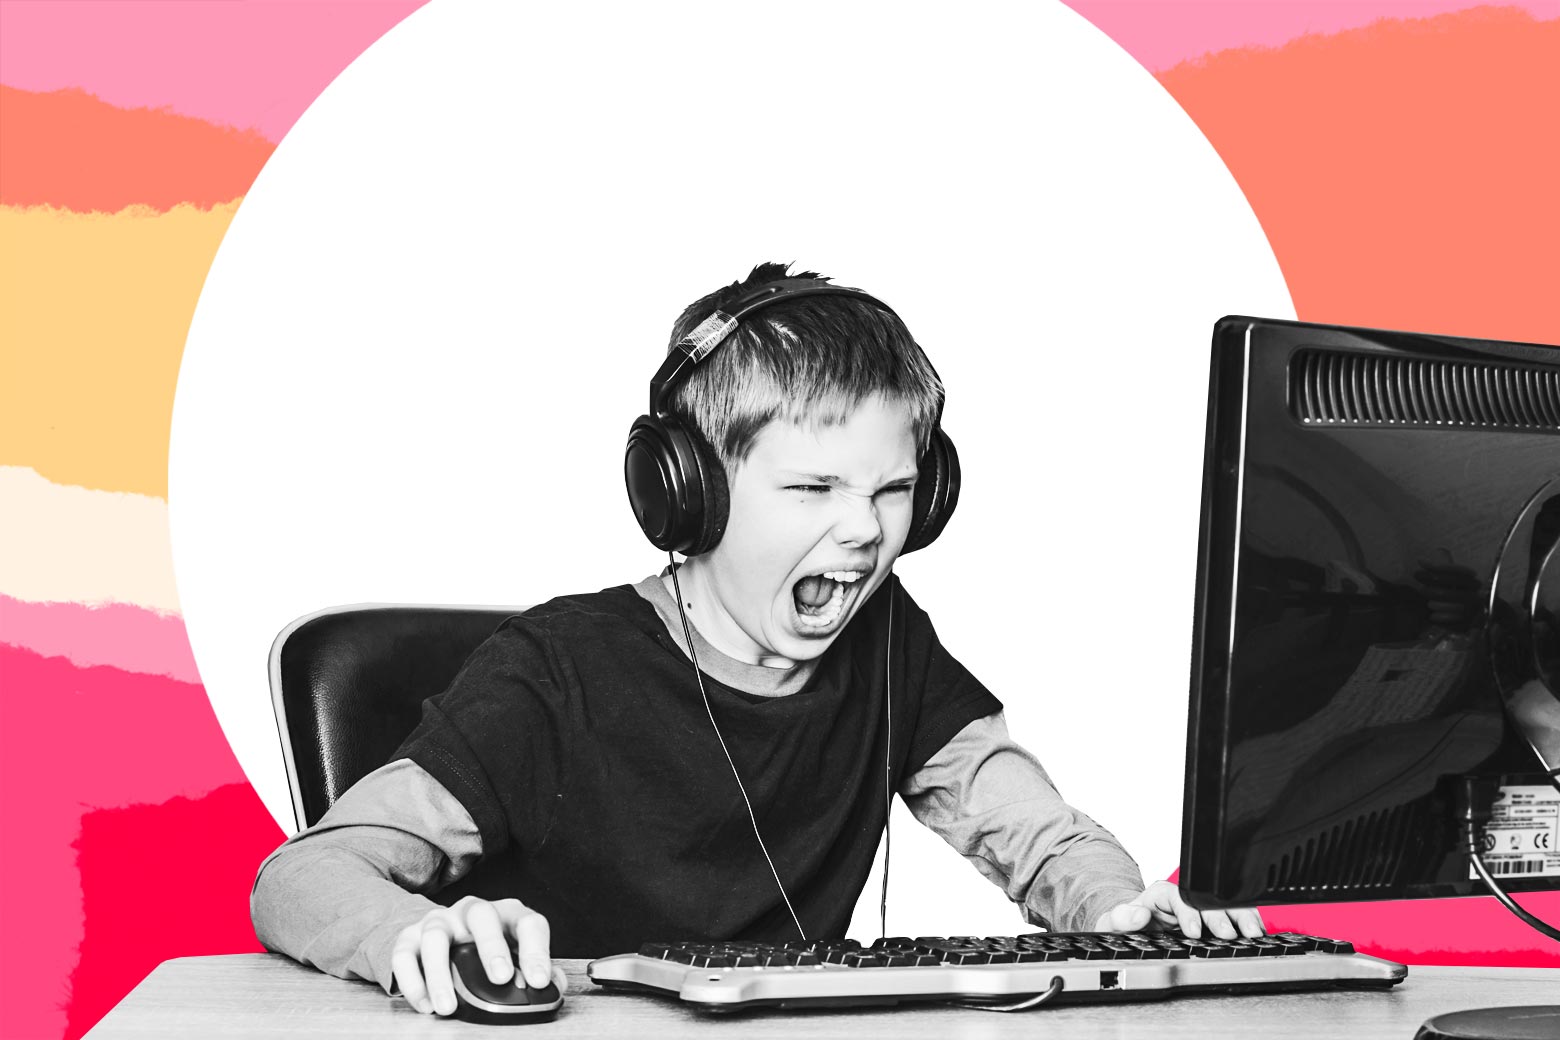 A kid with headphones on yelling at a computer screen.